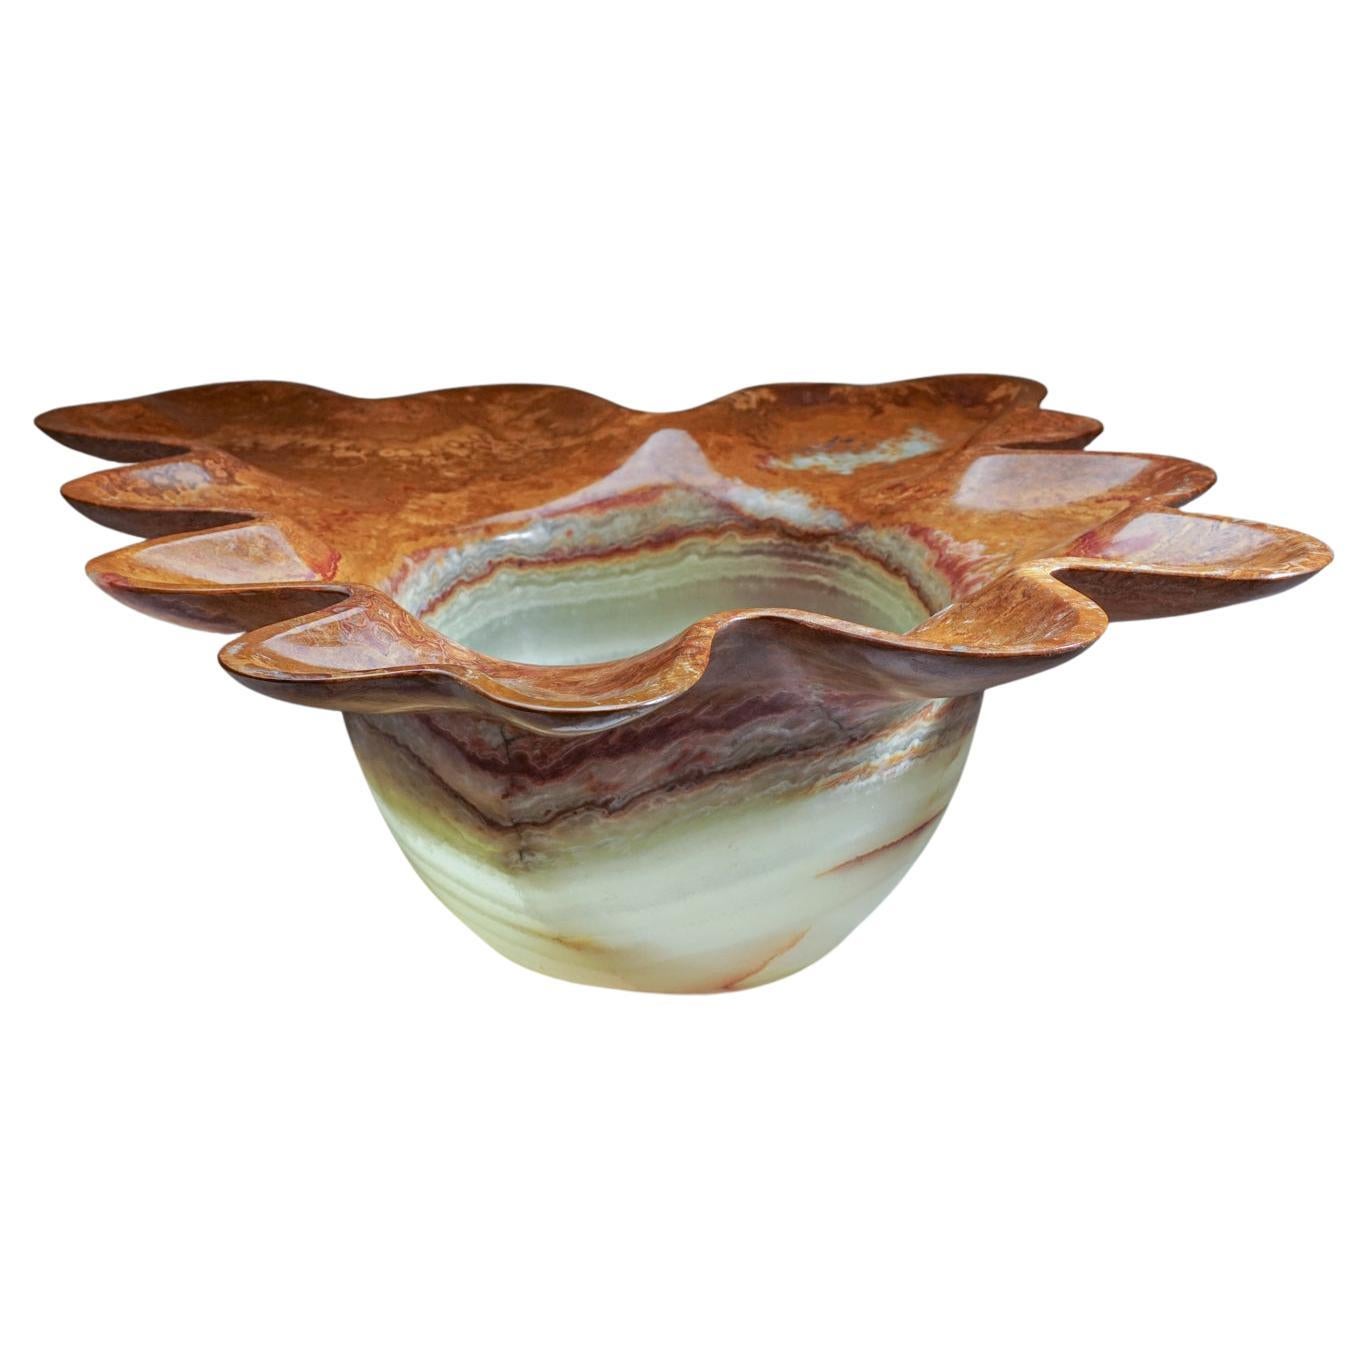 Green and Brown Onyx Decorative Bowl From Mexico ( 26" x 25" x 7", 34 lbs.) For Sale